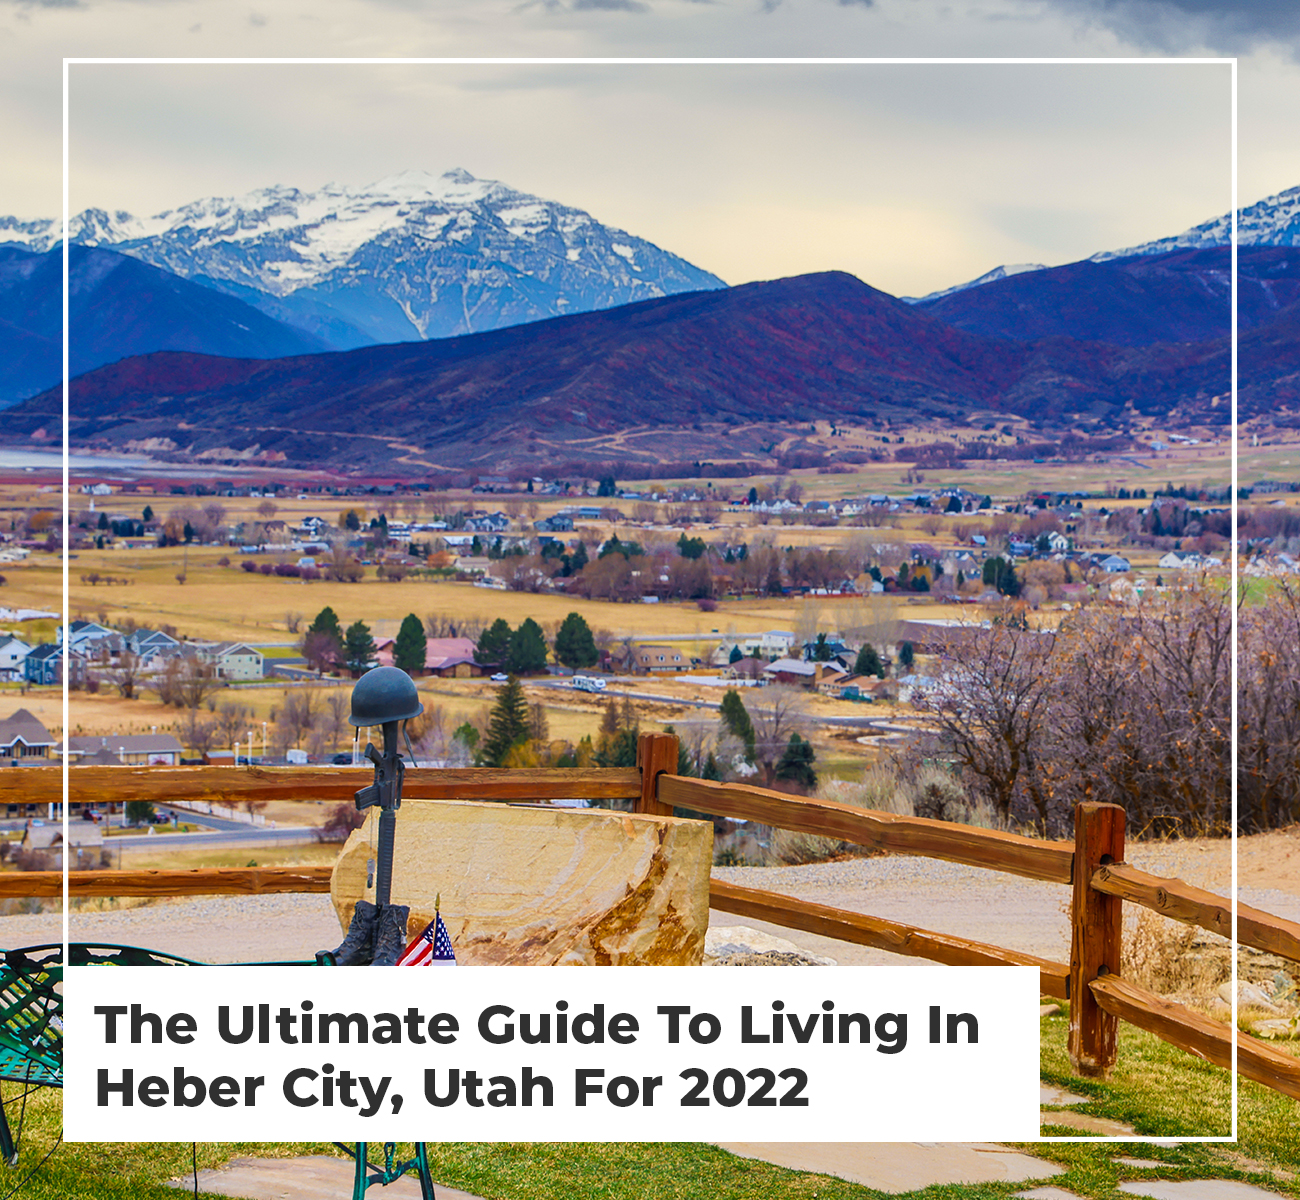 The Ultimate Guide To Living In Heber City, Utah For 2022 - Main Image